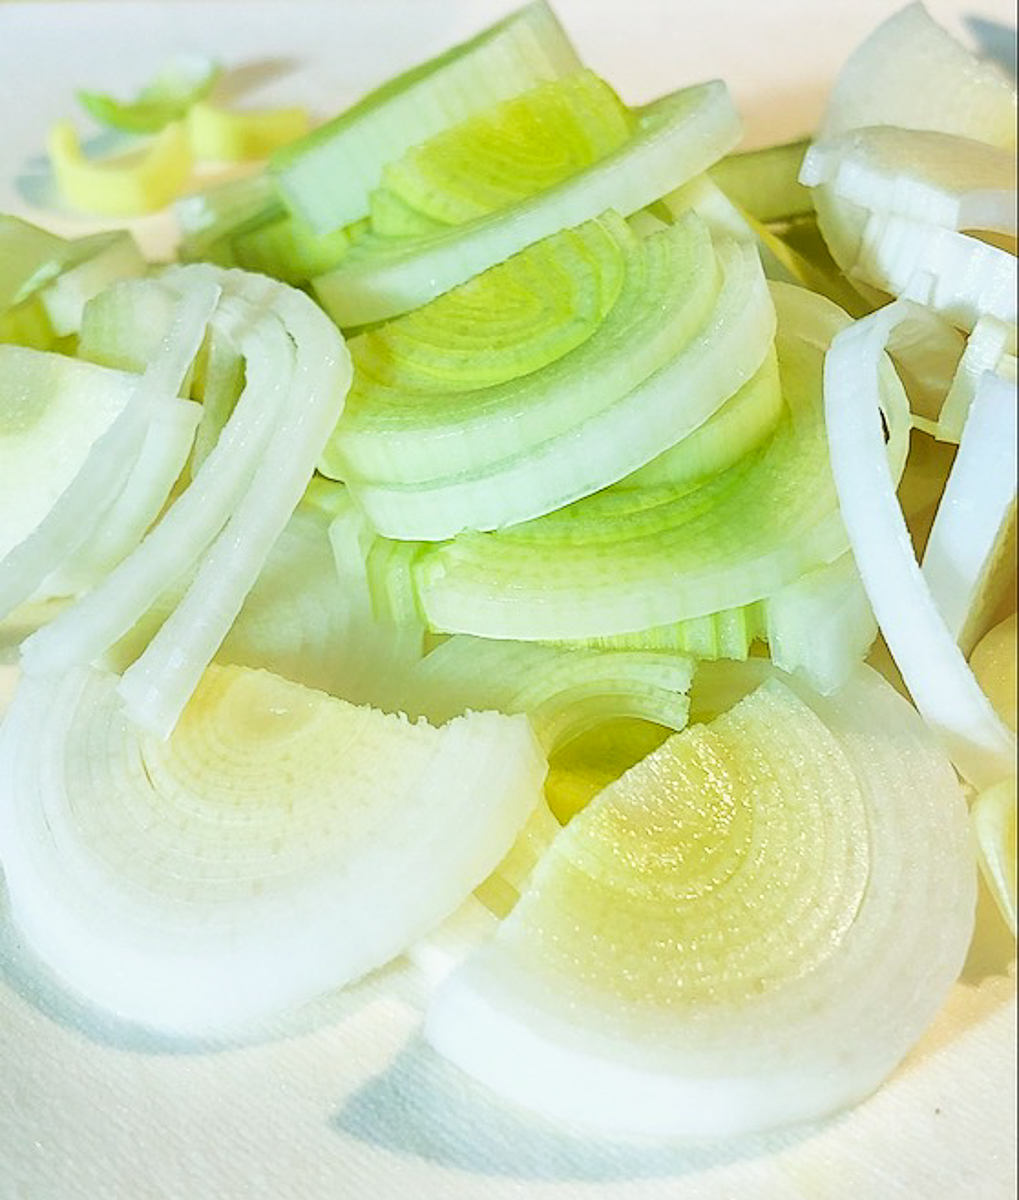 Sliced pale green and white parts of a leek. The slices are round with many concentric layers.